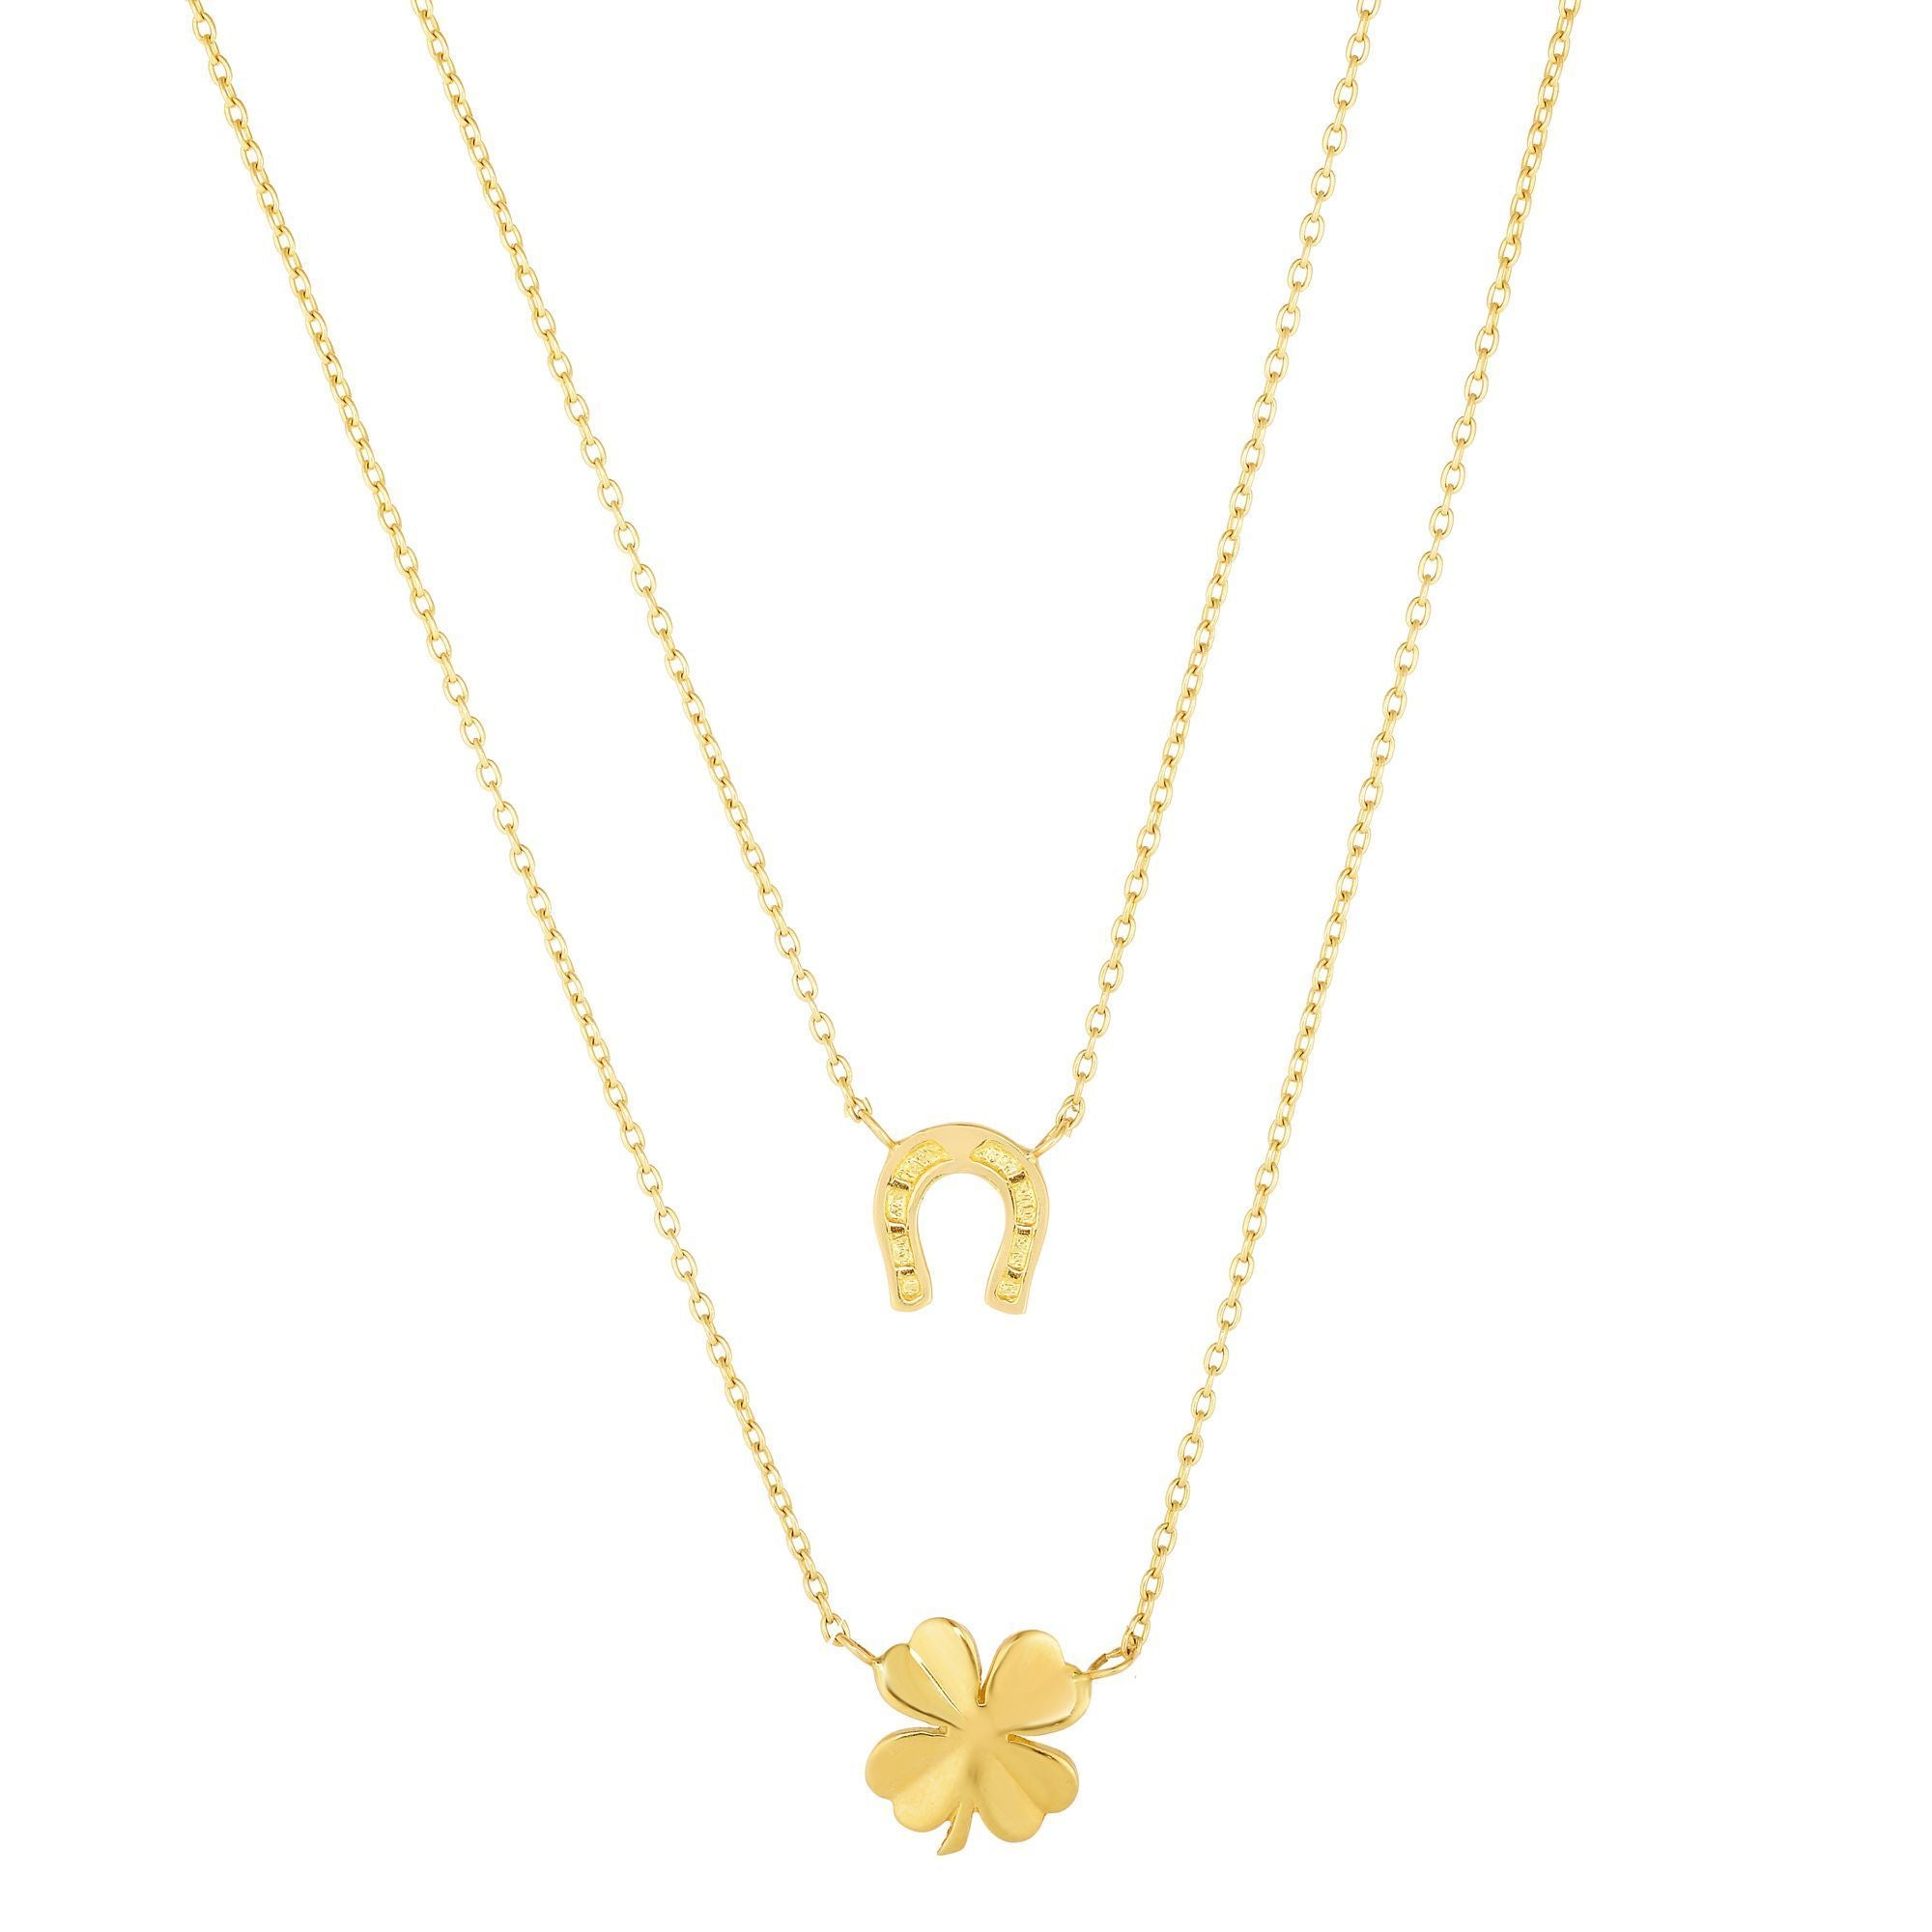 Minimalist Solid Gold Good Luck Horseshoe and 4 Clover Layered Necklace - wingroupjewelry